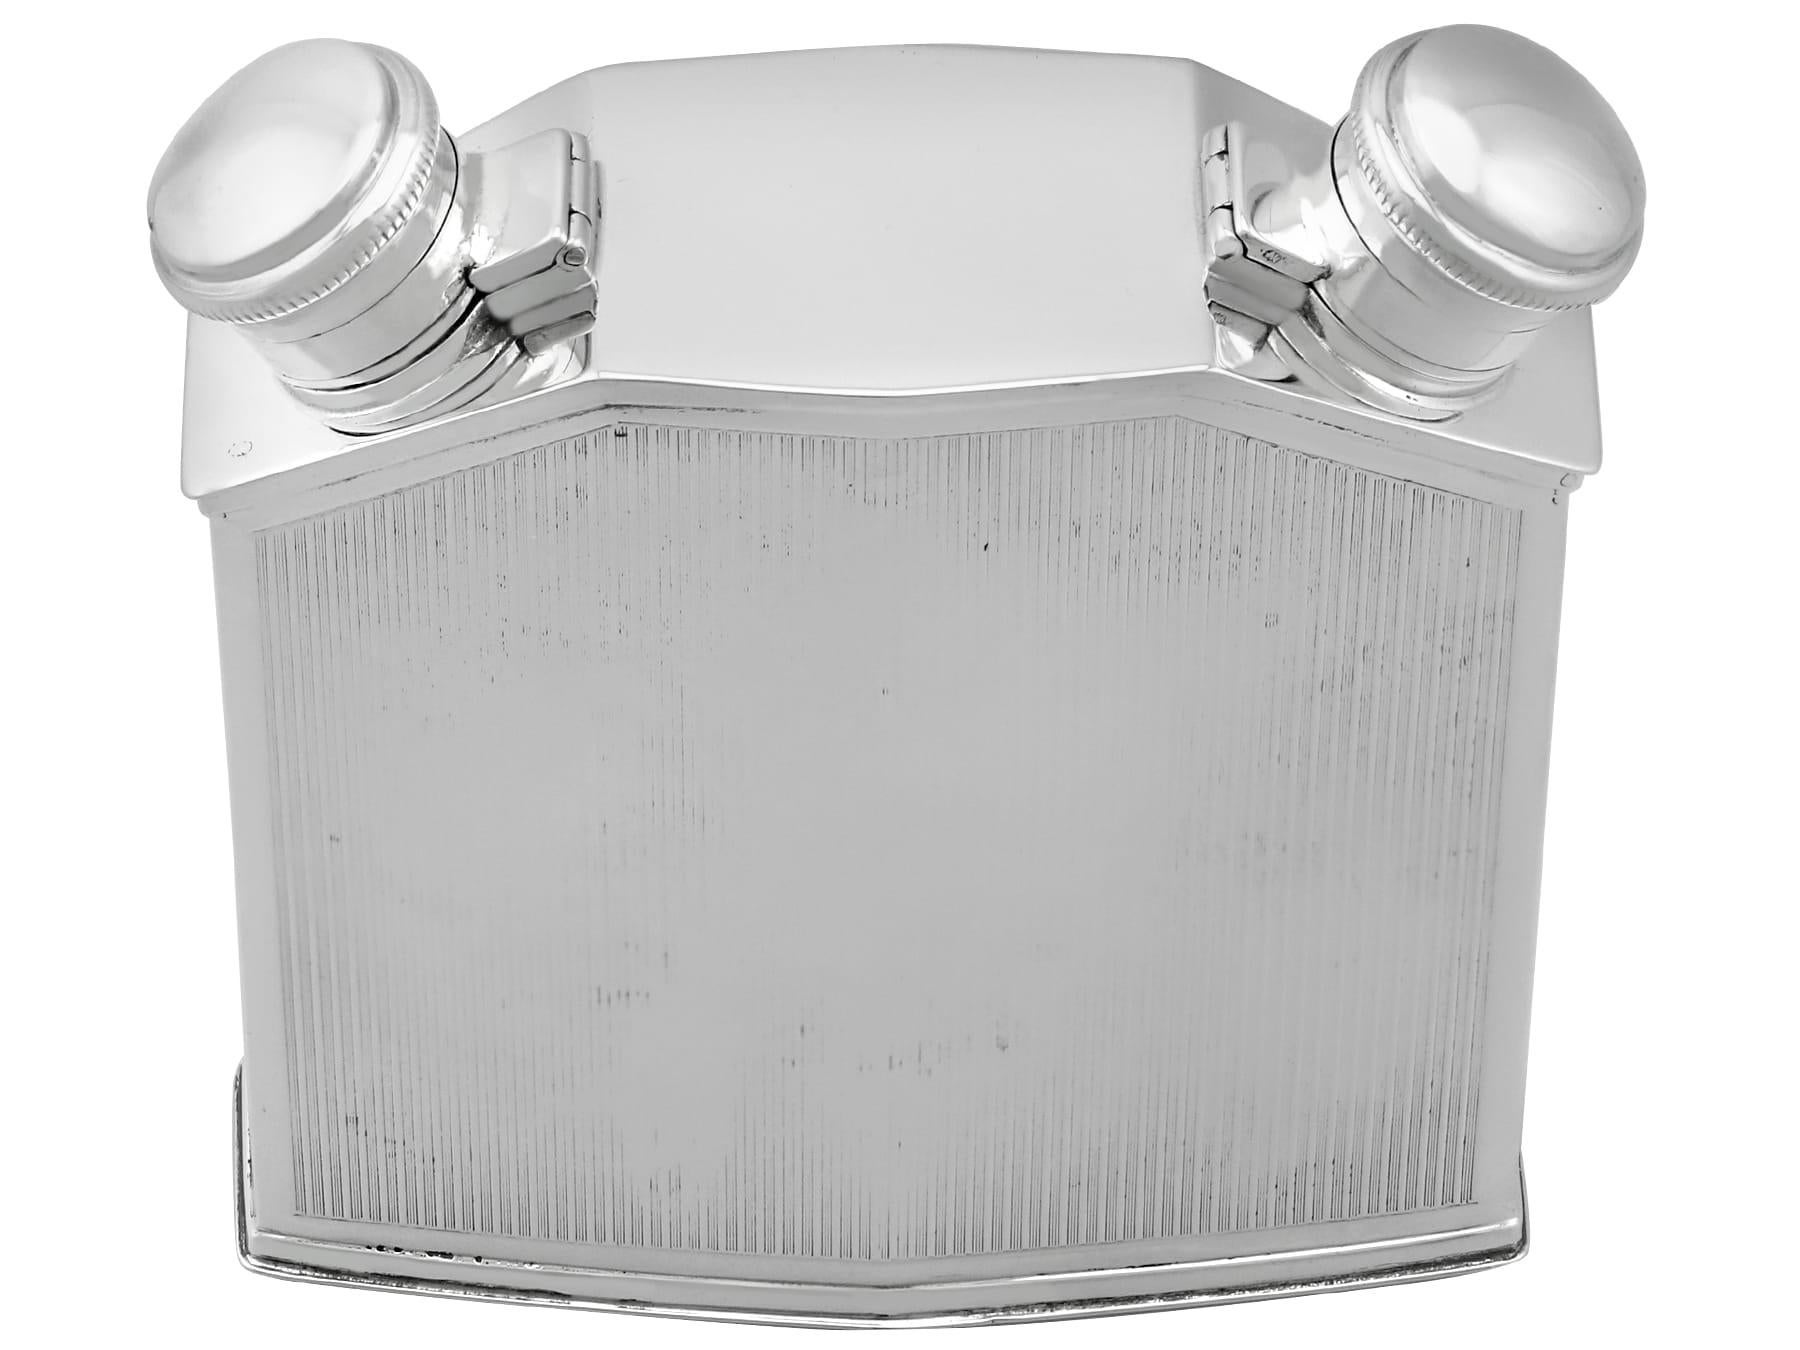 An exceptional, fine and impressive antique George V English sterling silver double hip flask in the form of a car radiator; an addition to our wine and drinks related silverware collection.

This exceptional antique George V sterling silver hip